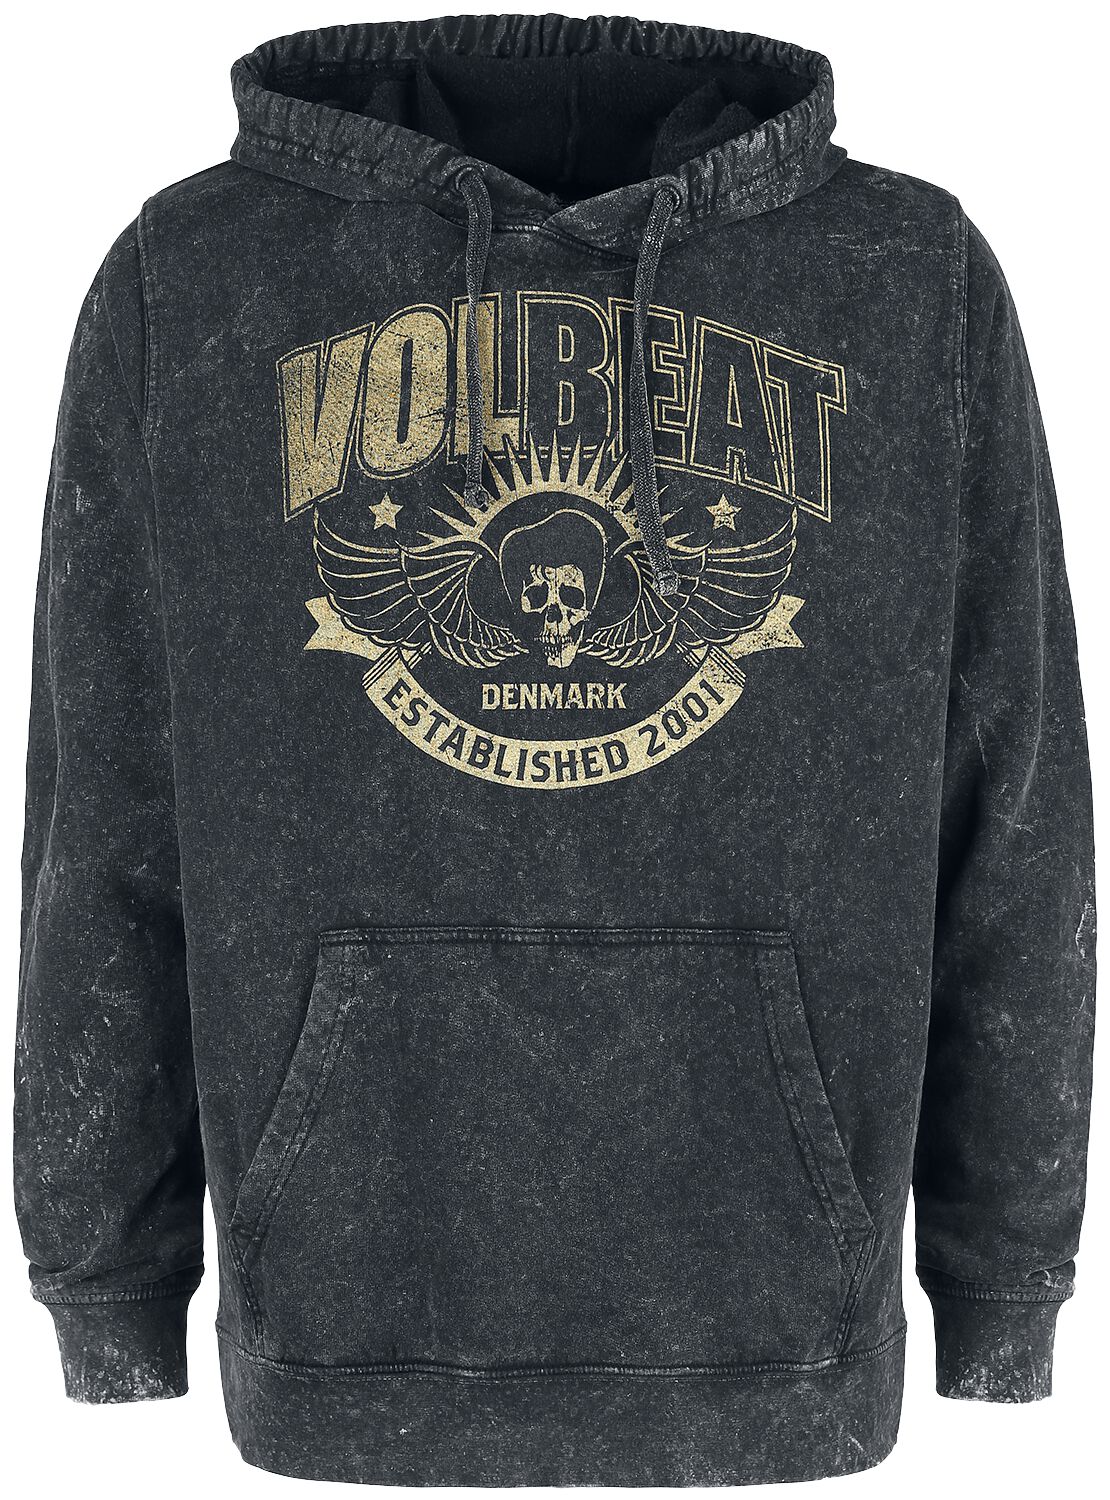 Volbeat Established 2001 Hooded sweater grey